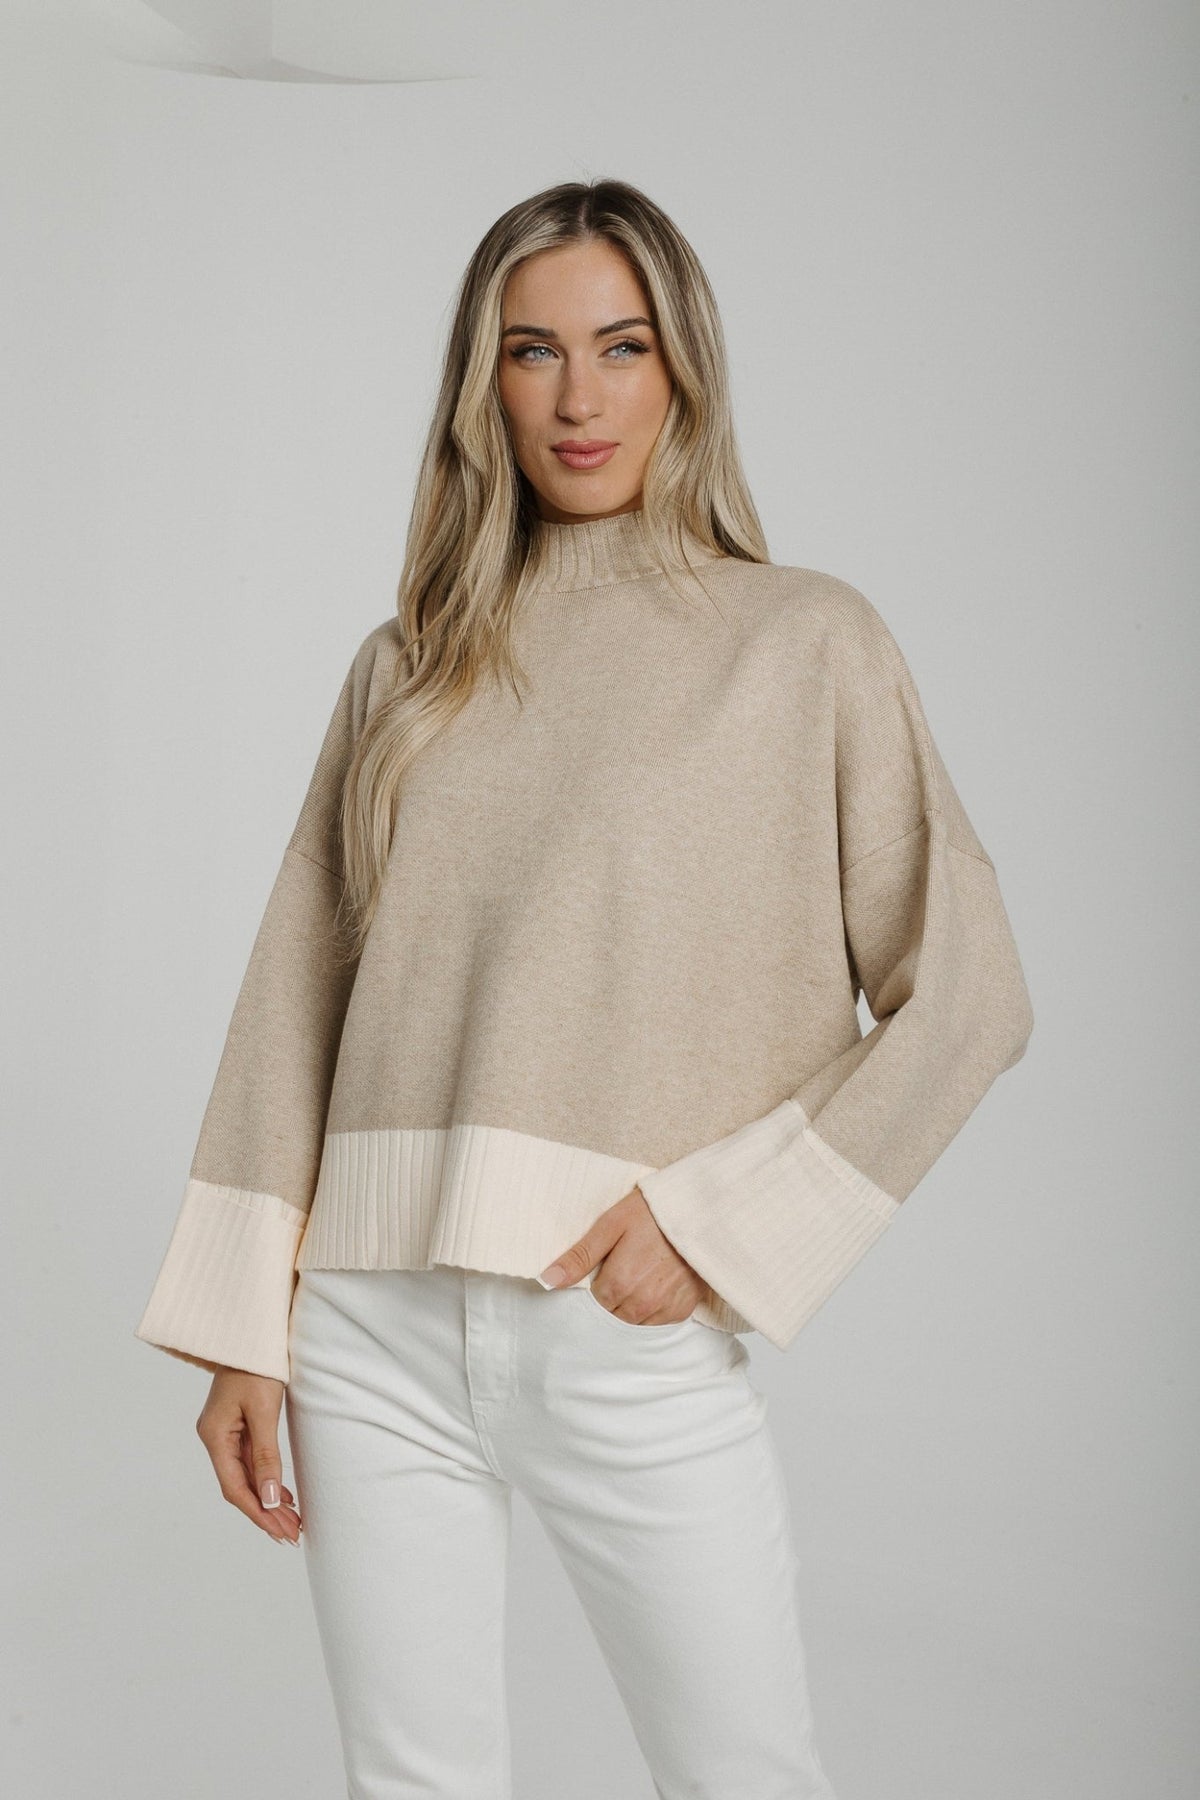 Polly Contrast High Neck Sweater In Neutral - The Walk in Wardrobe